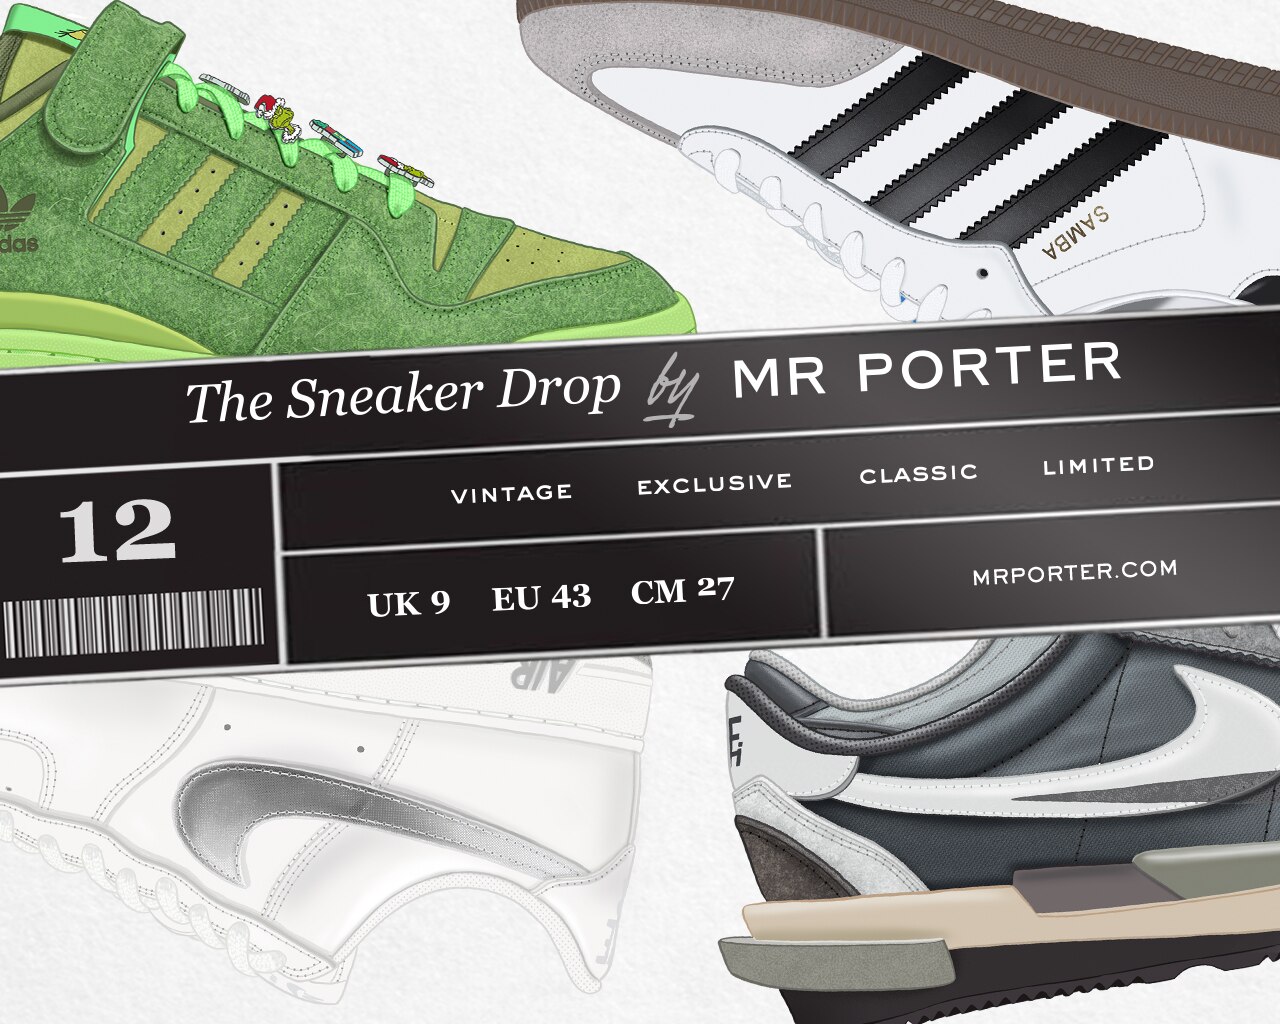 lost heart Cosmic space Fashion: The Sneaker Drop – December's Big Releases From Nike And Adidas |  The Journal | MR PORTER